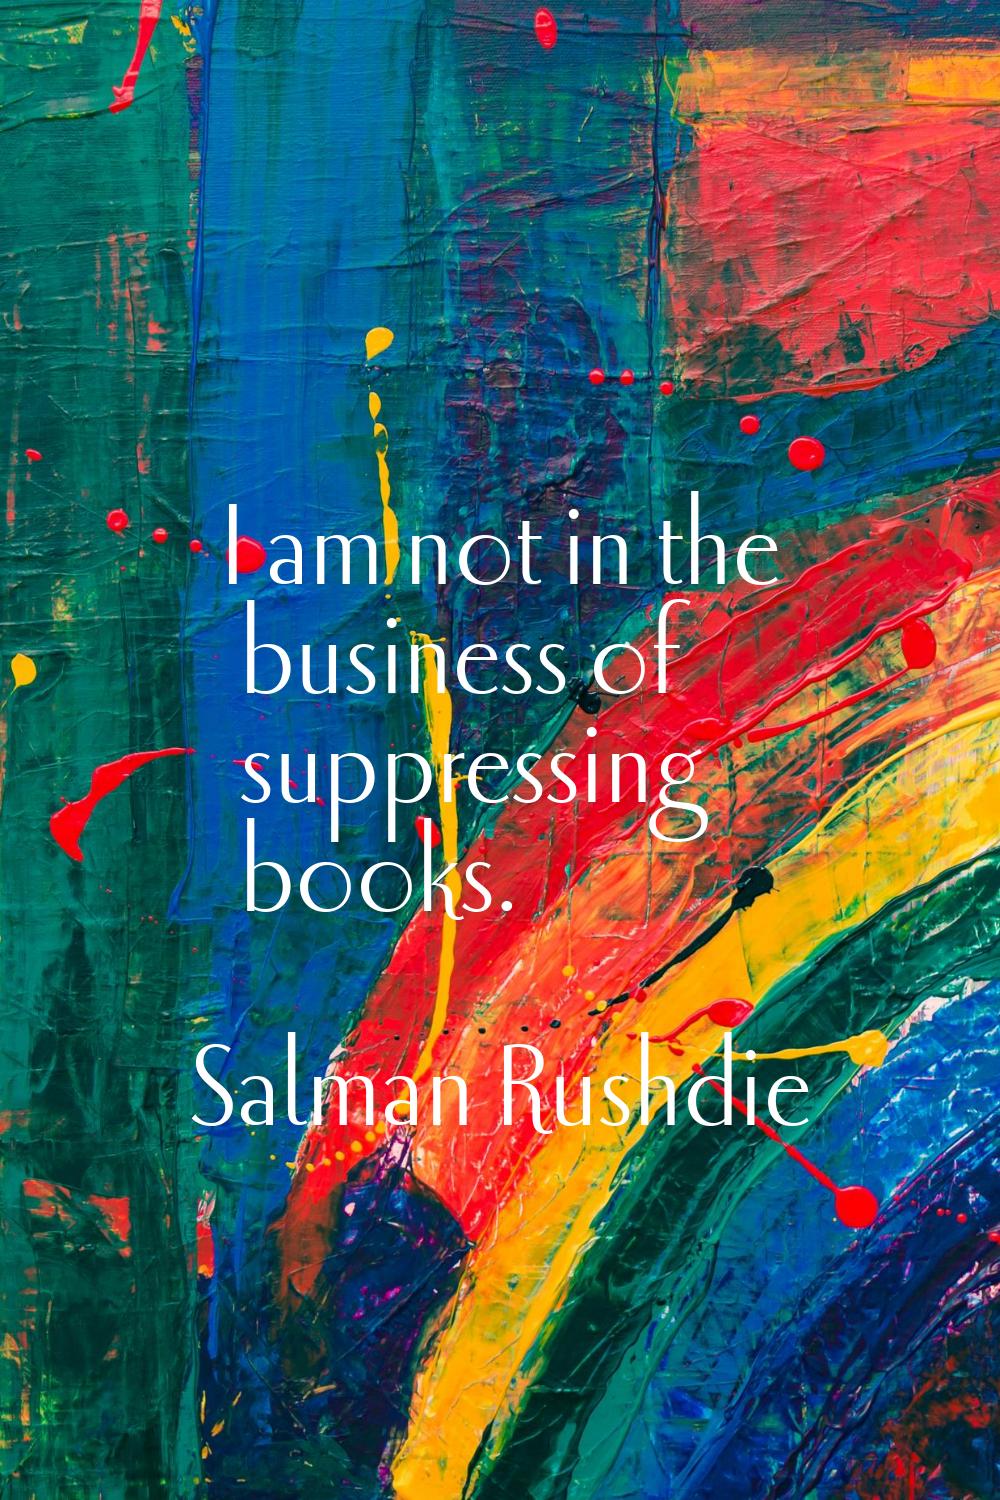 I am not in the business of suppressing books.